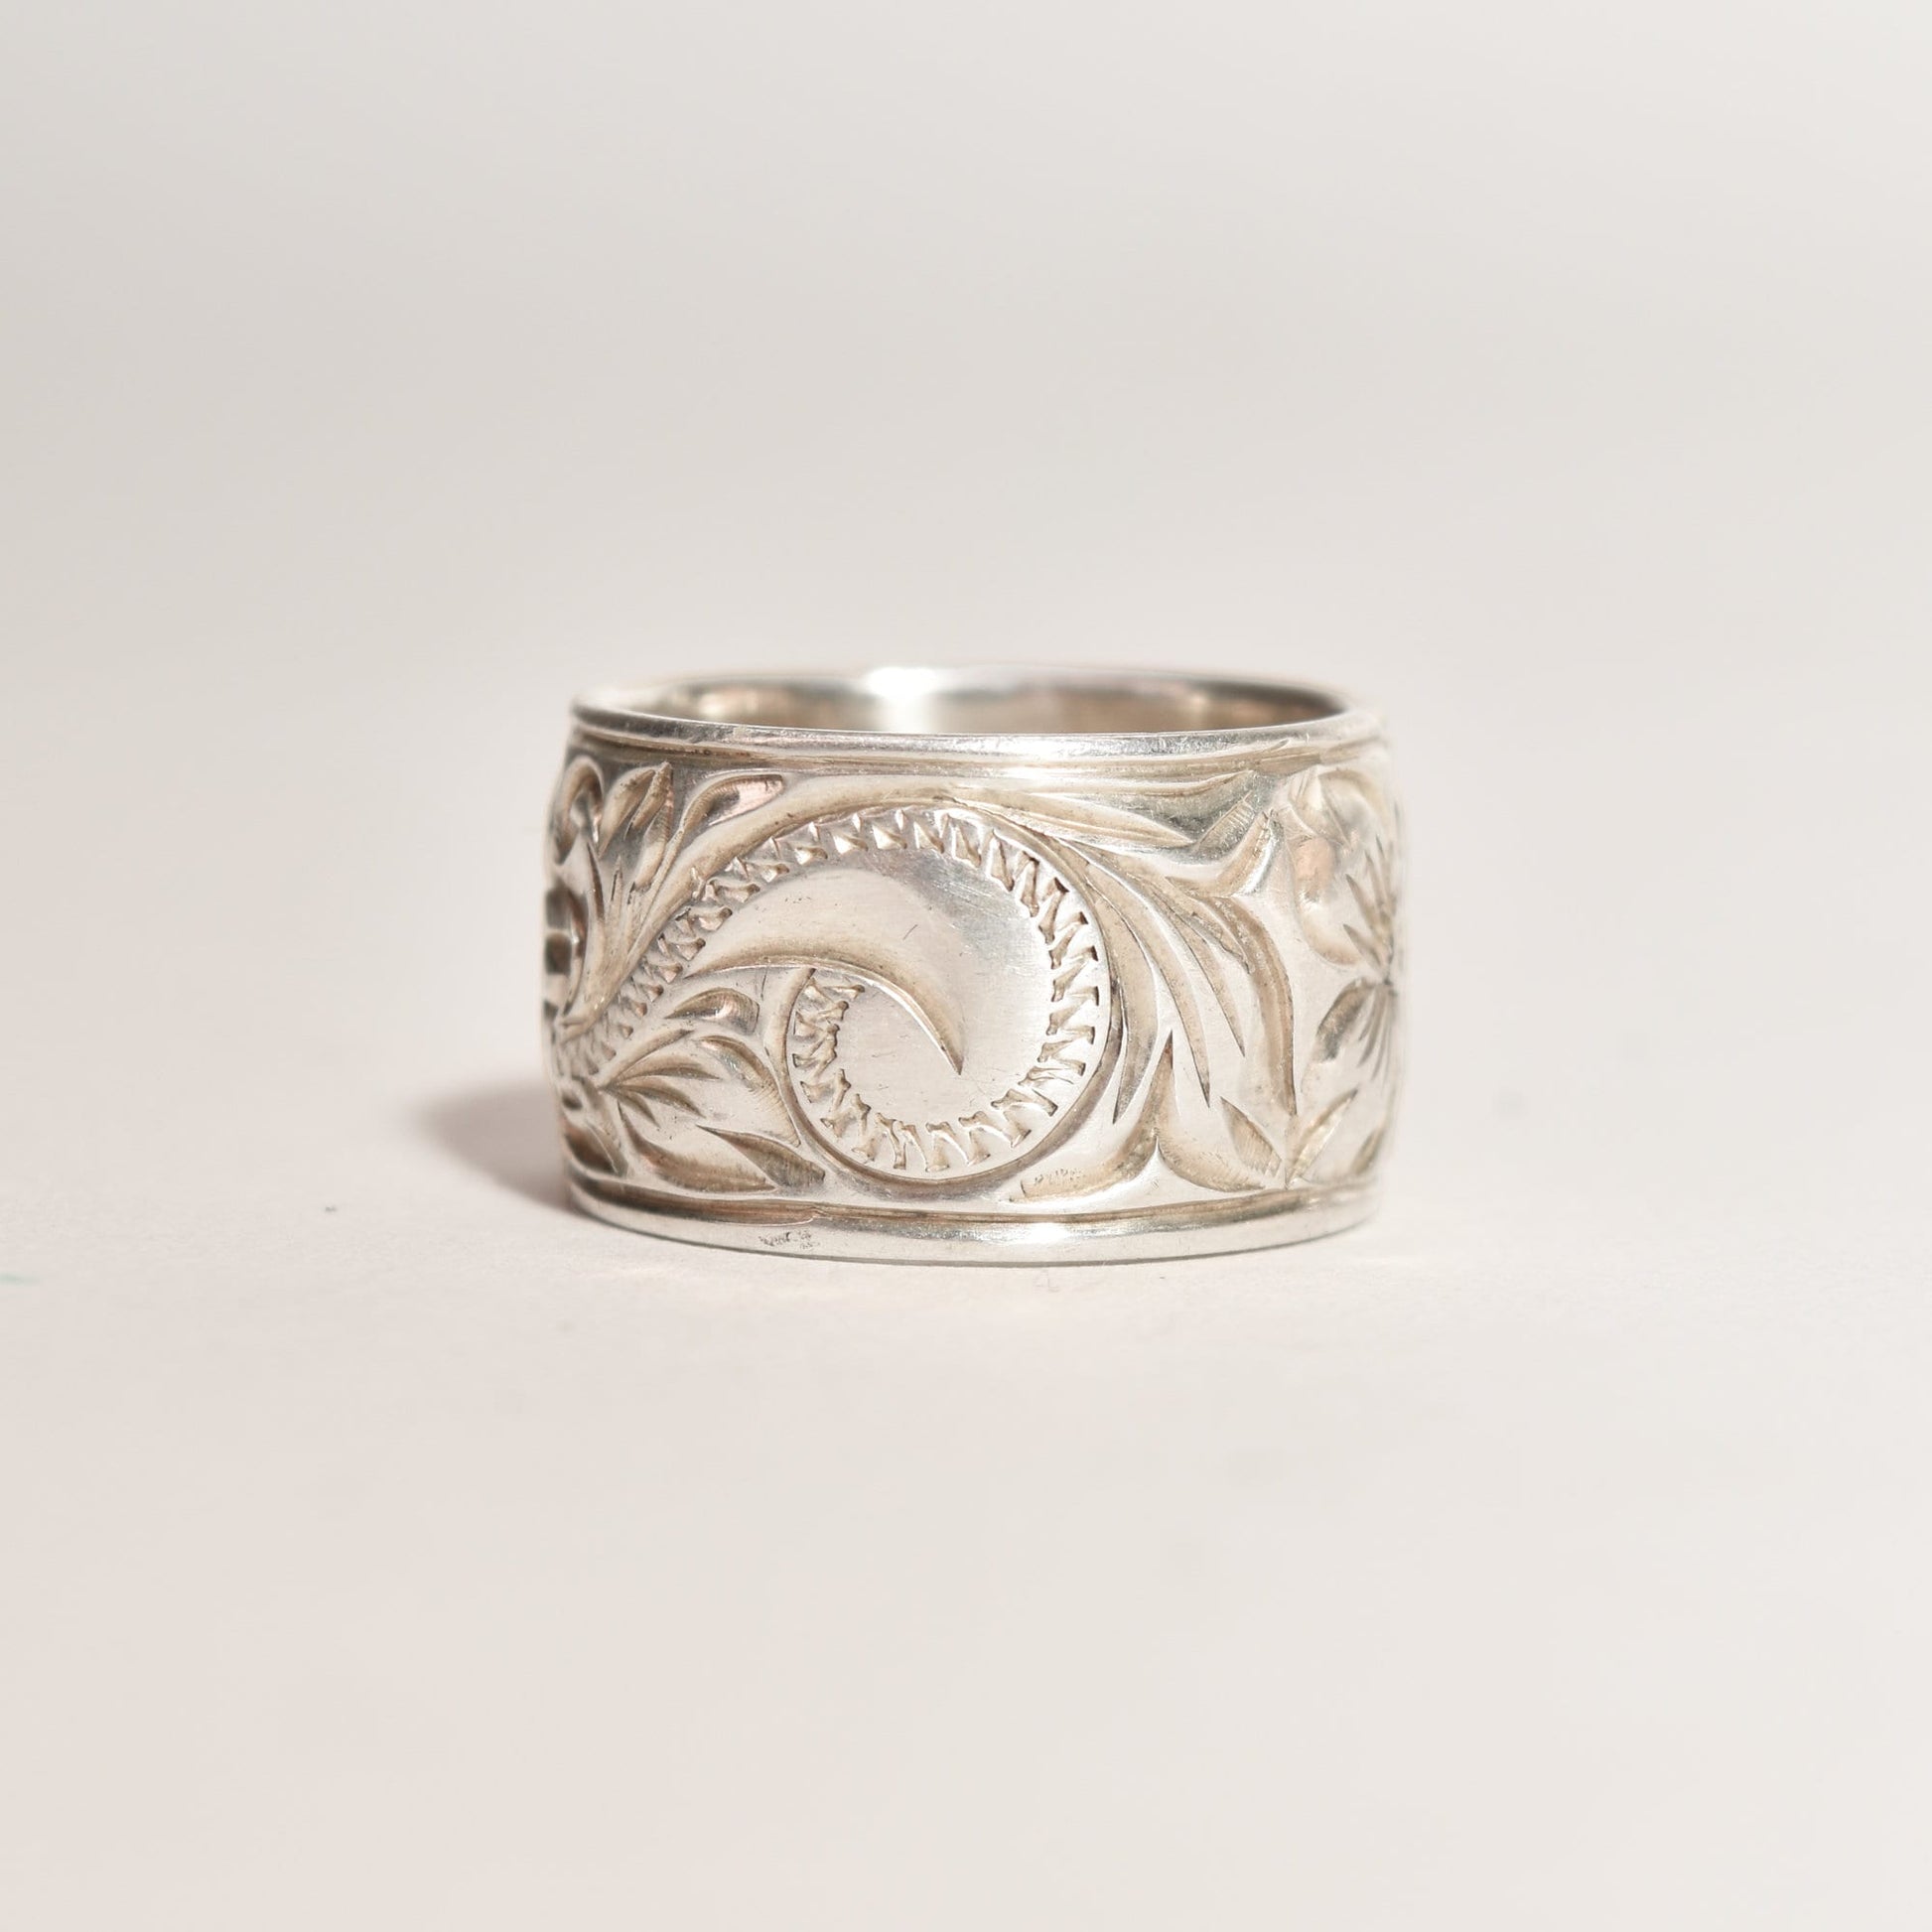 Floral engraved sterling silver band ring, 11.5mm wide with Art Nouveau revival style design, size 6 US, showcased on a neutral background.